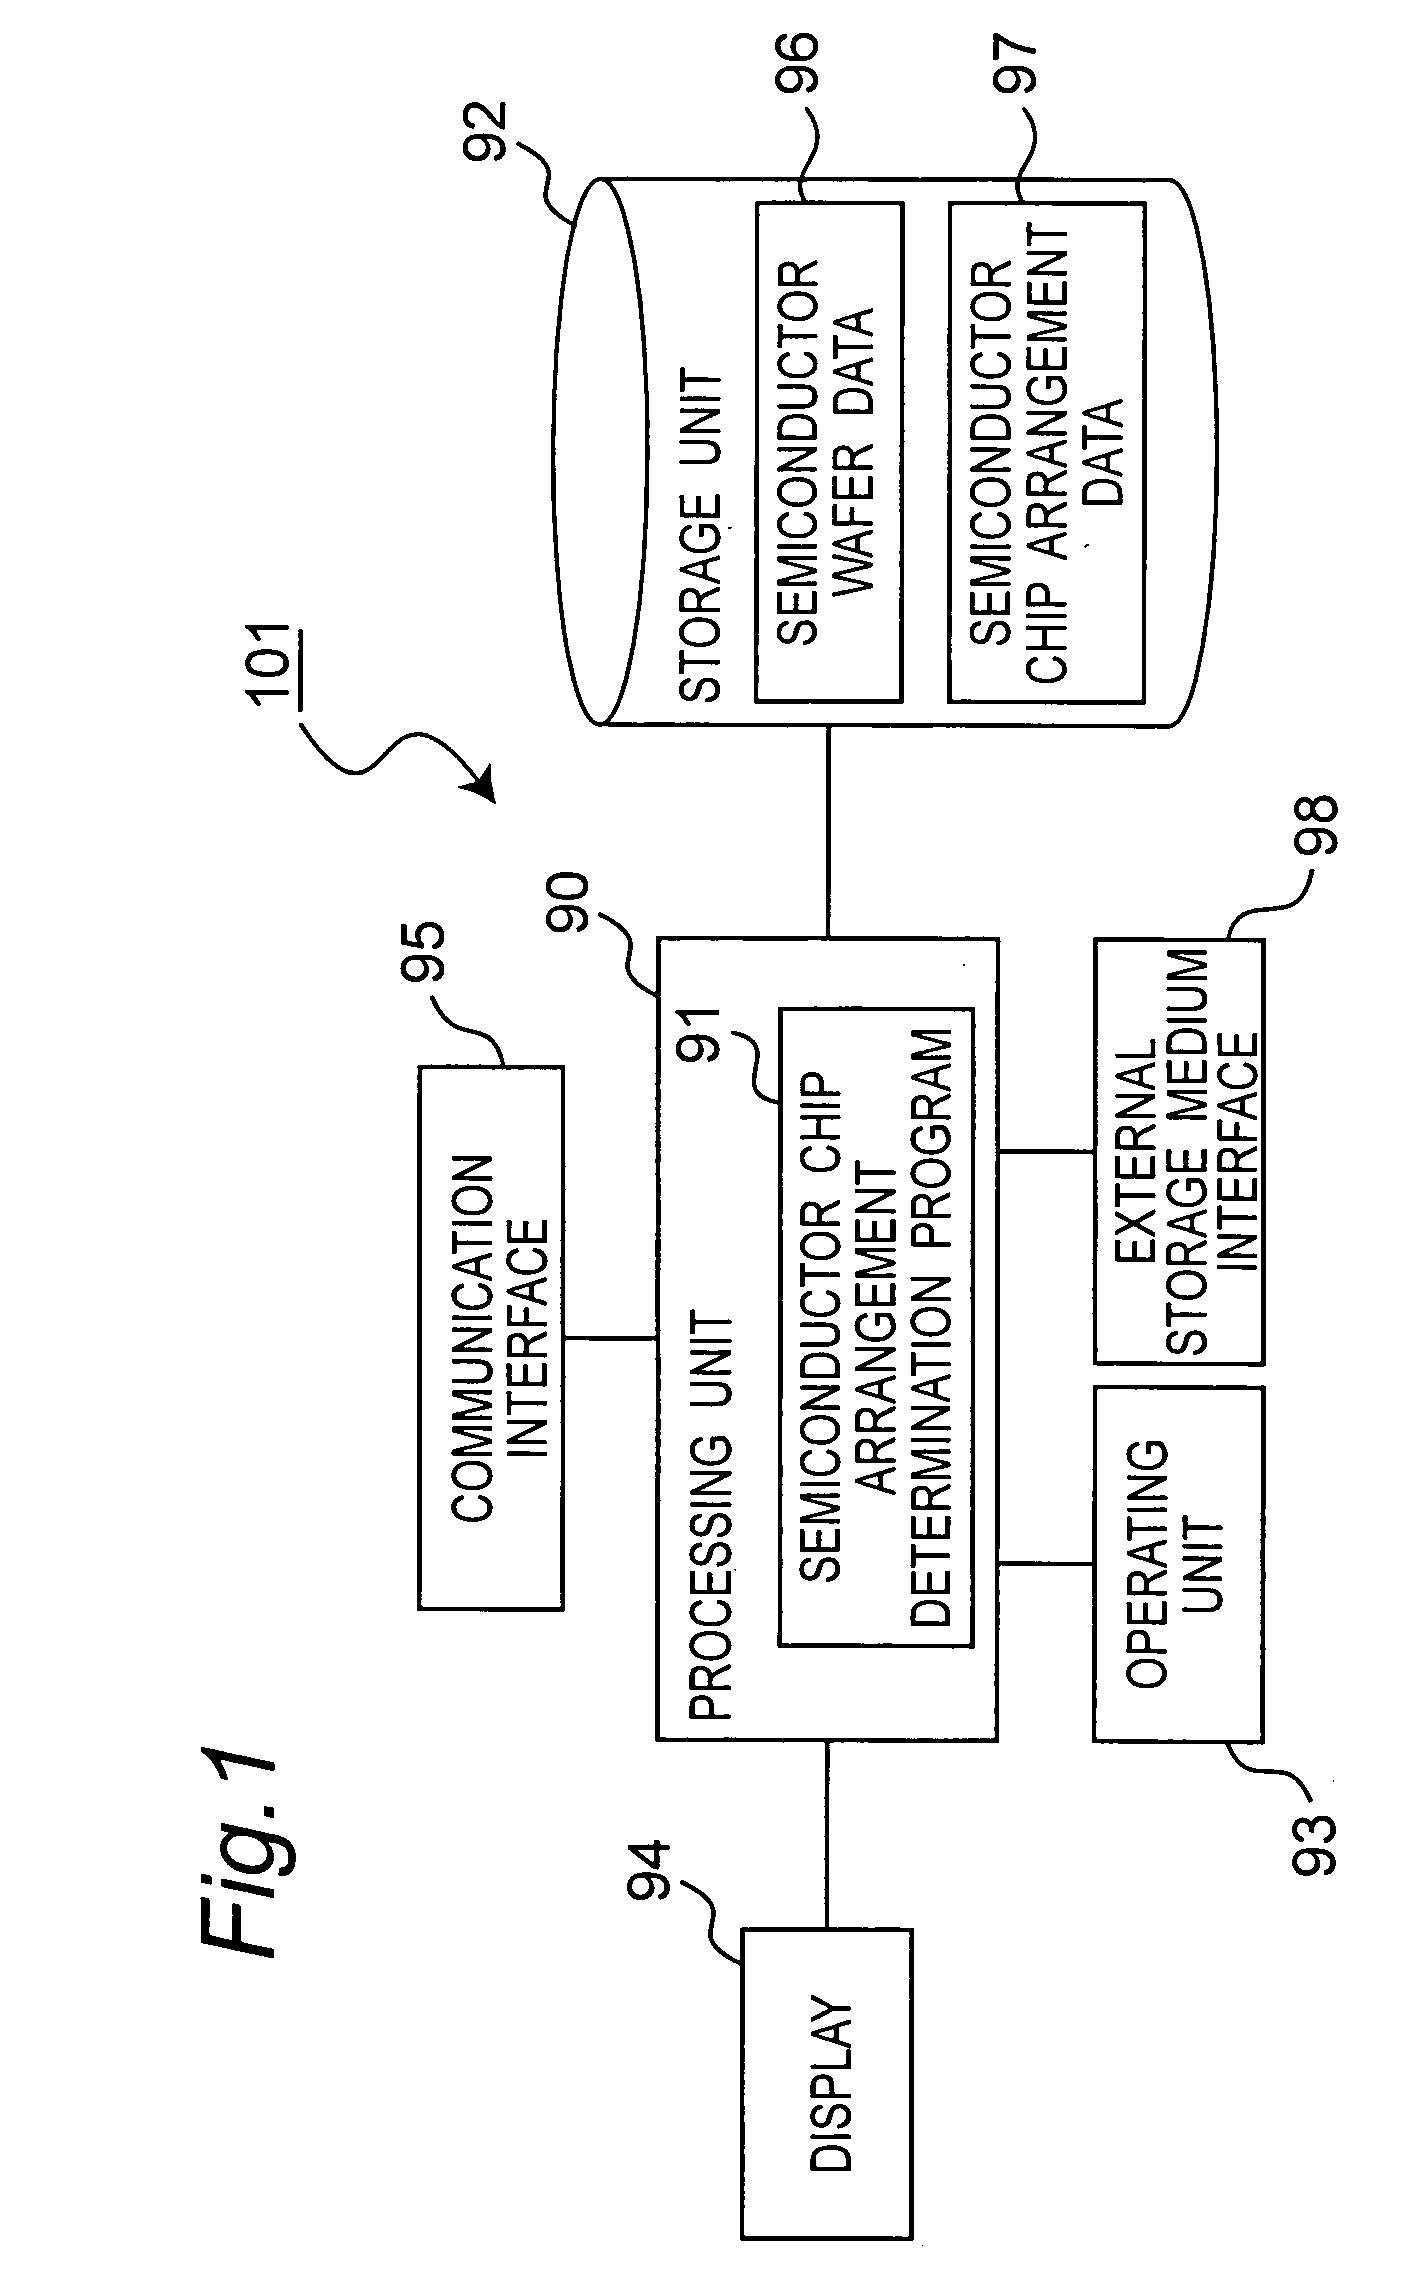 Manufacturing method for semiconductor devices, arrangement determination method and apparatus for semiconductor device formation regions, and program for determining arrangement of semiconductor device formation regions